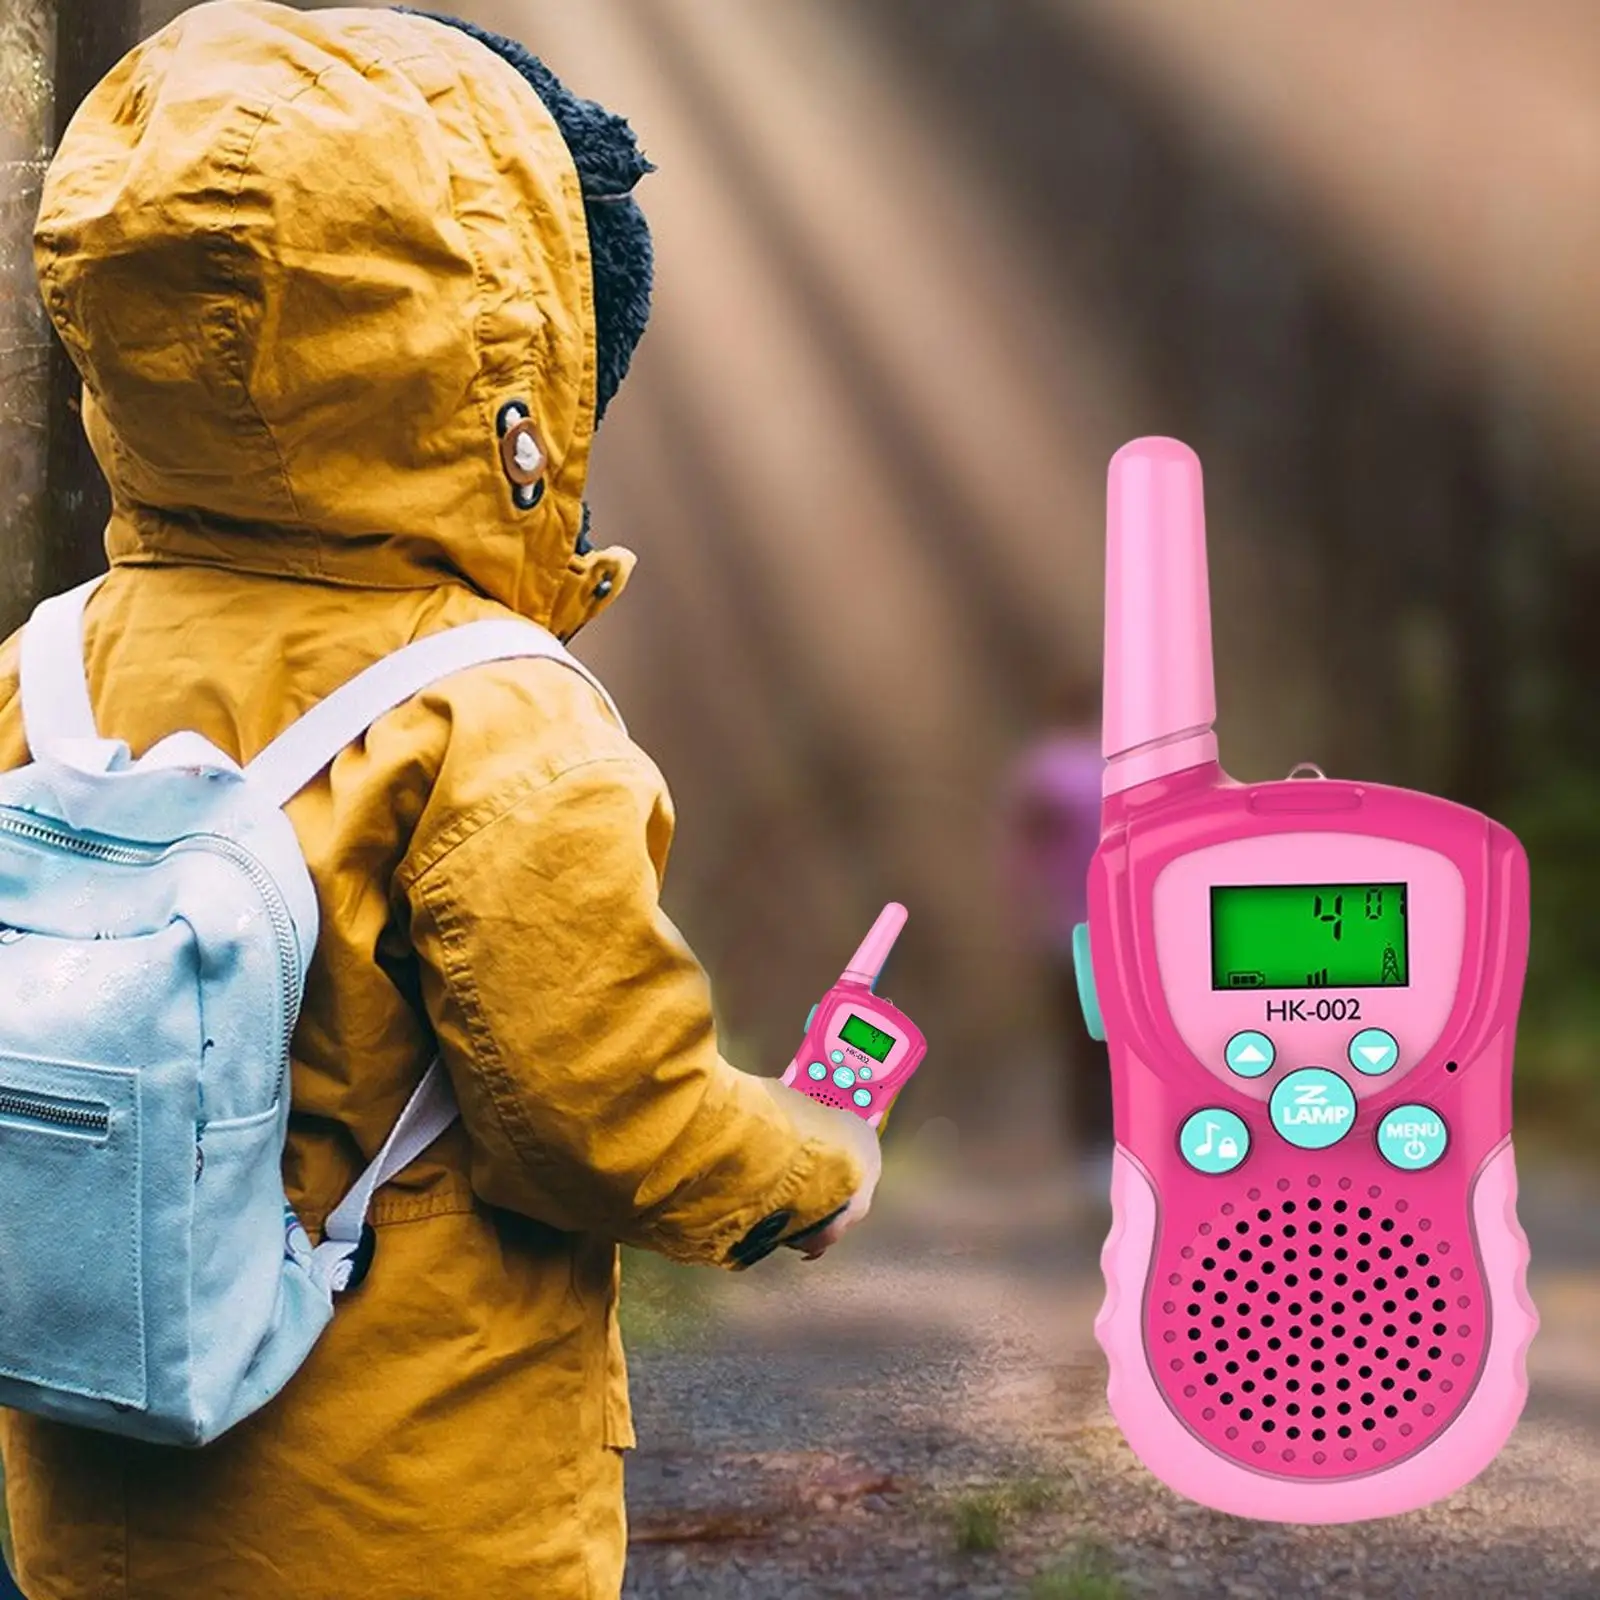 2 Pieces Walkie Talkies for Kids Walky Talky Toy for 3-14 Years Old Hiking